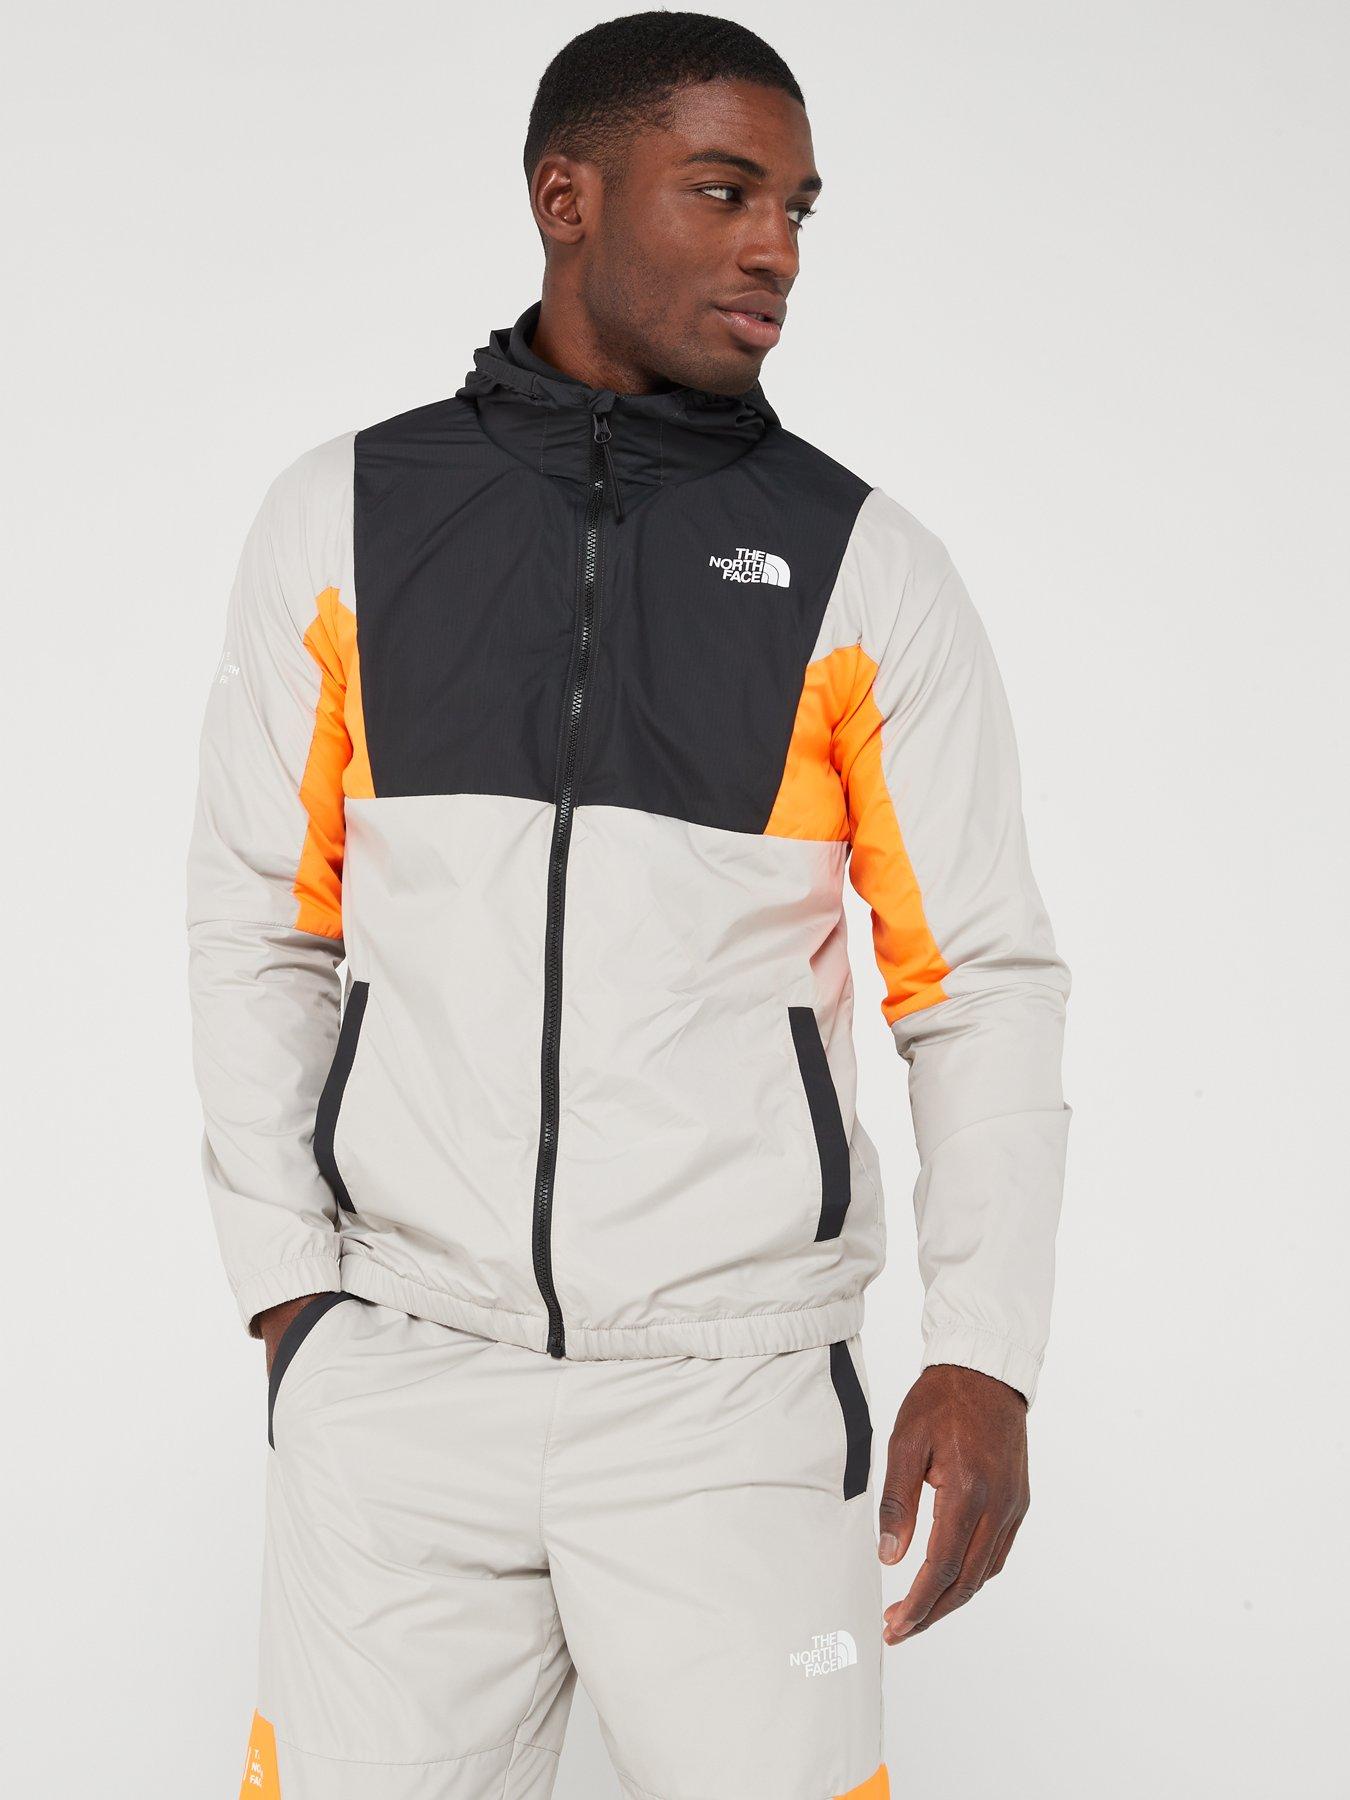 THE NORTH FACE Men's Mountain Athletics Wind Track Jacket - Grey